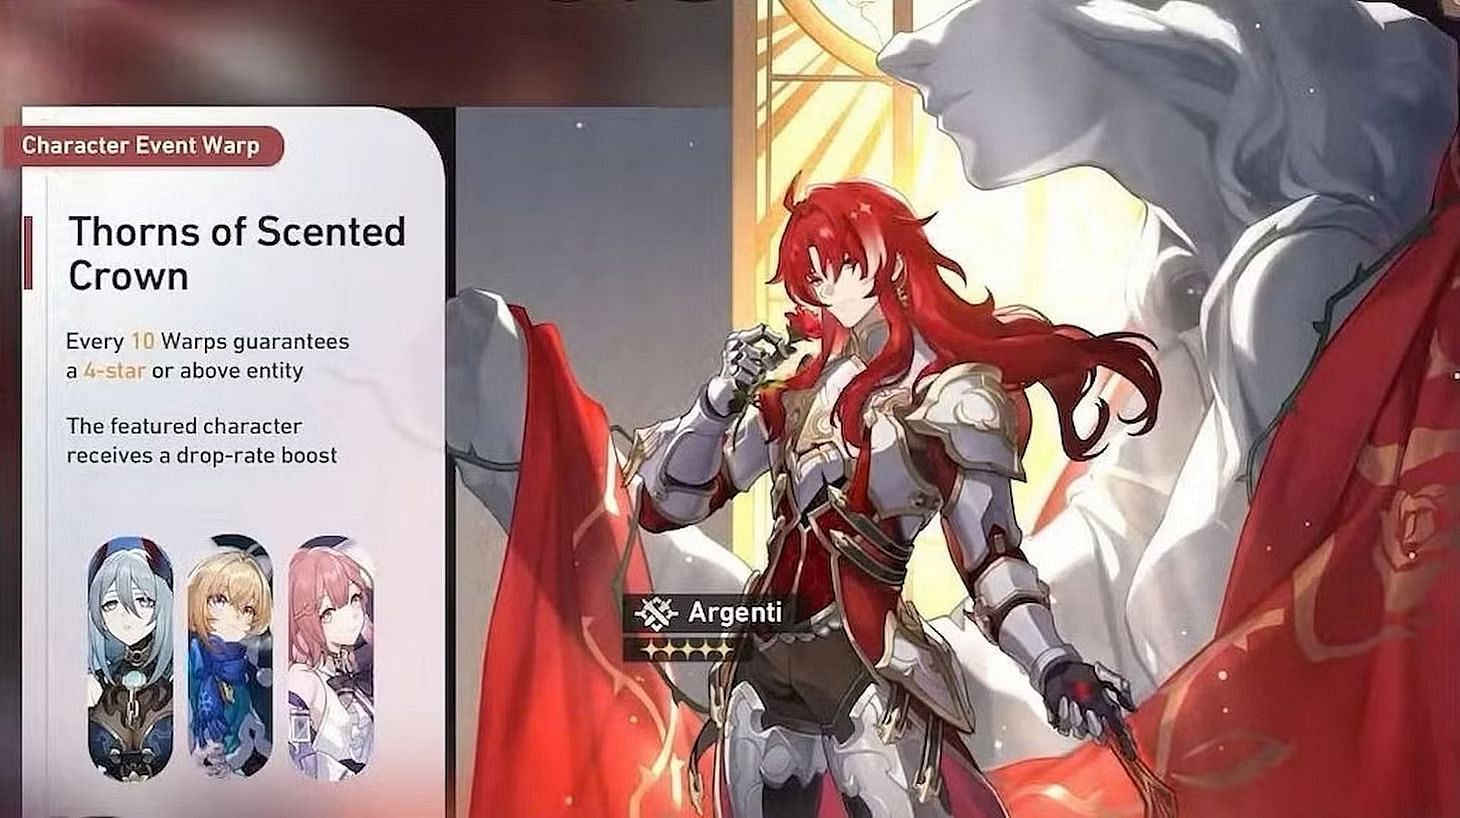 Argenti, a 5-star Physical element character (Image via HoYoverse)